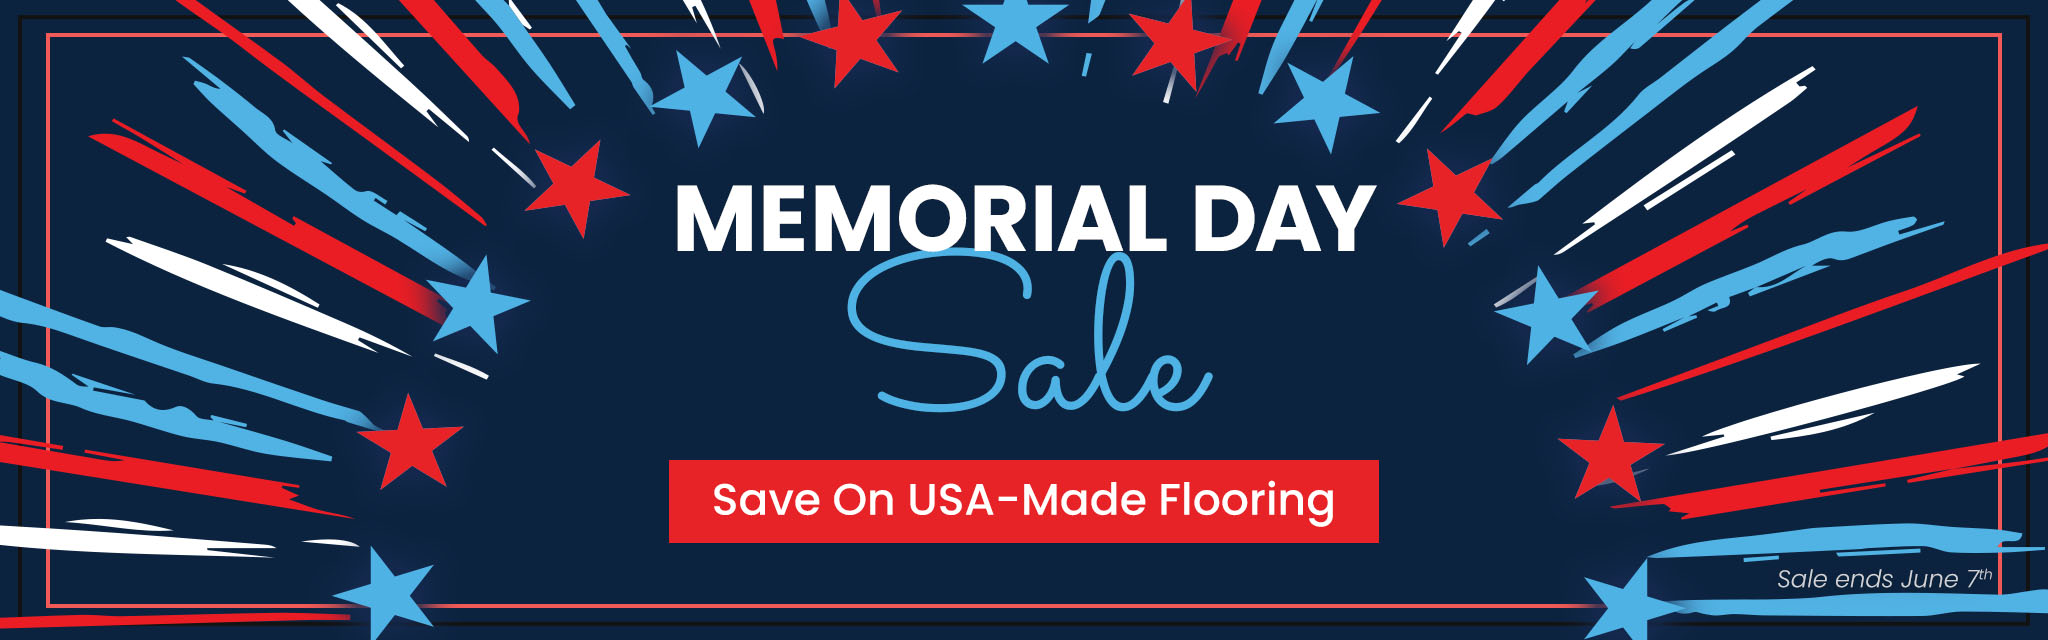 Memorial Day Sale. Save On USA-Made Flooring. Sale ends June 7th